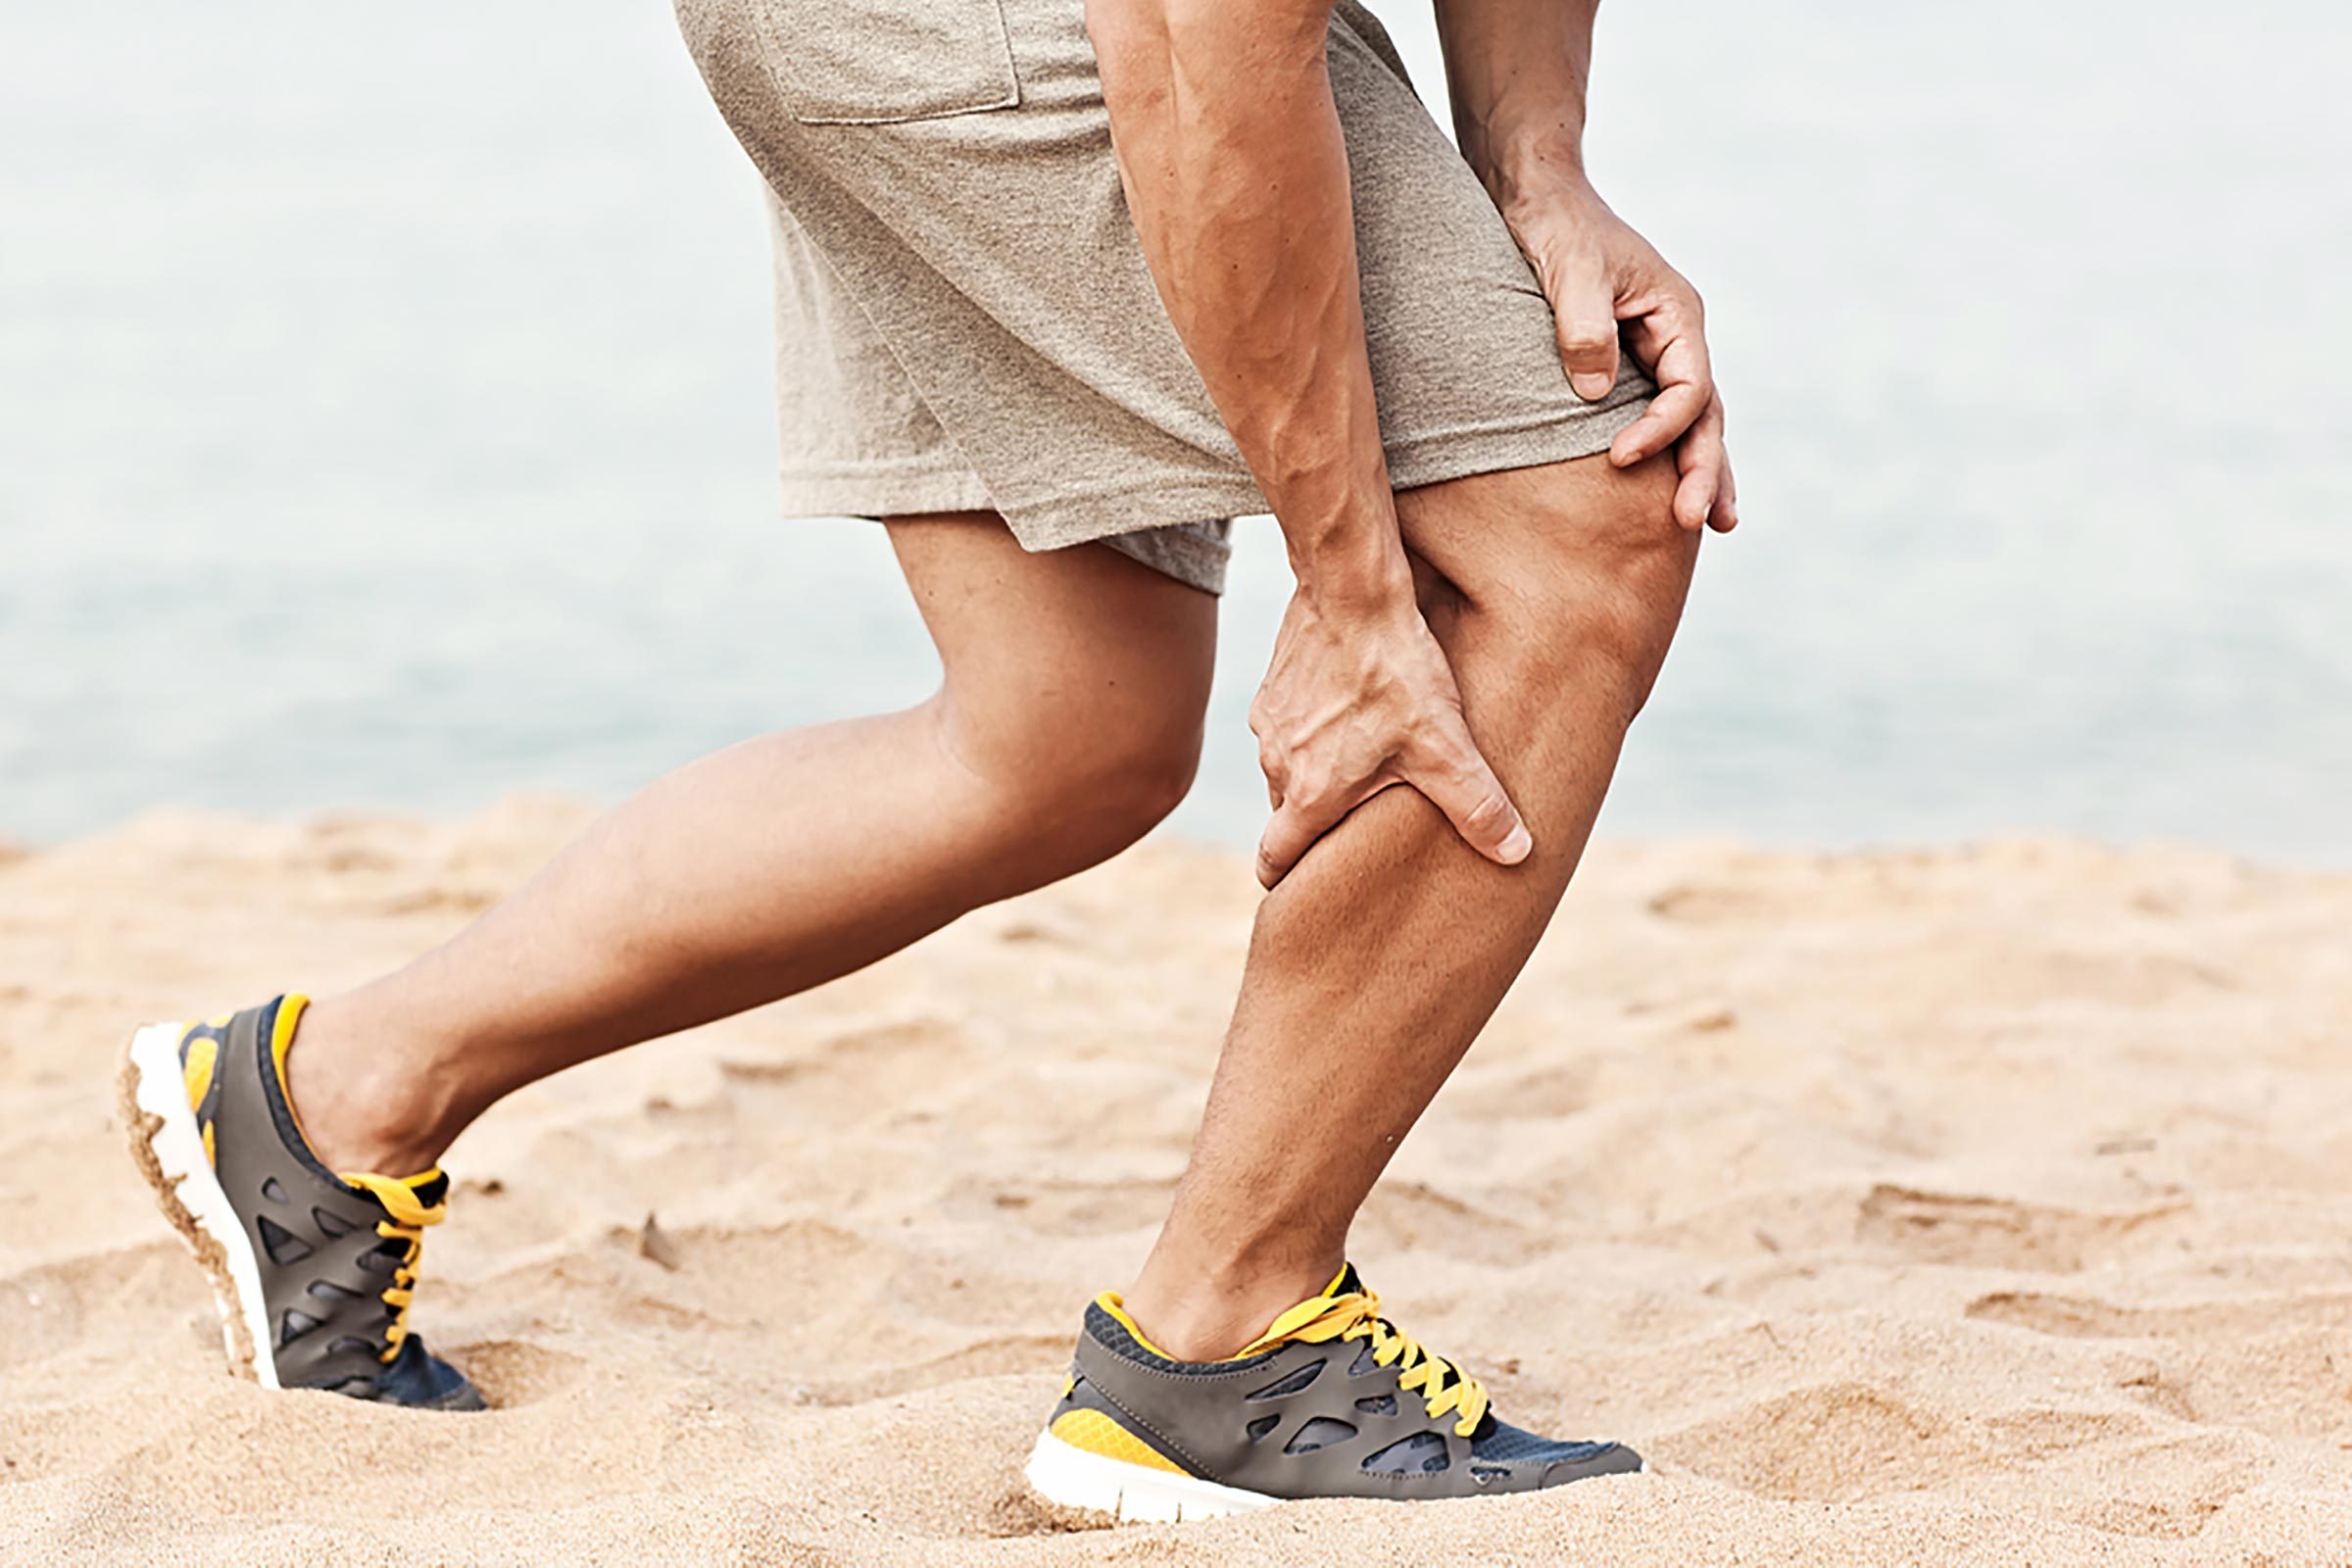 Man on the beach in running shoes, grabbing his calf muscle